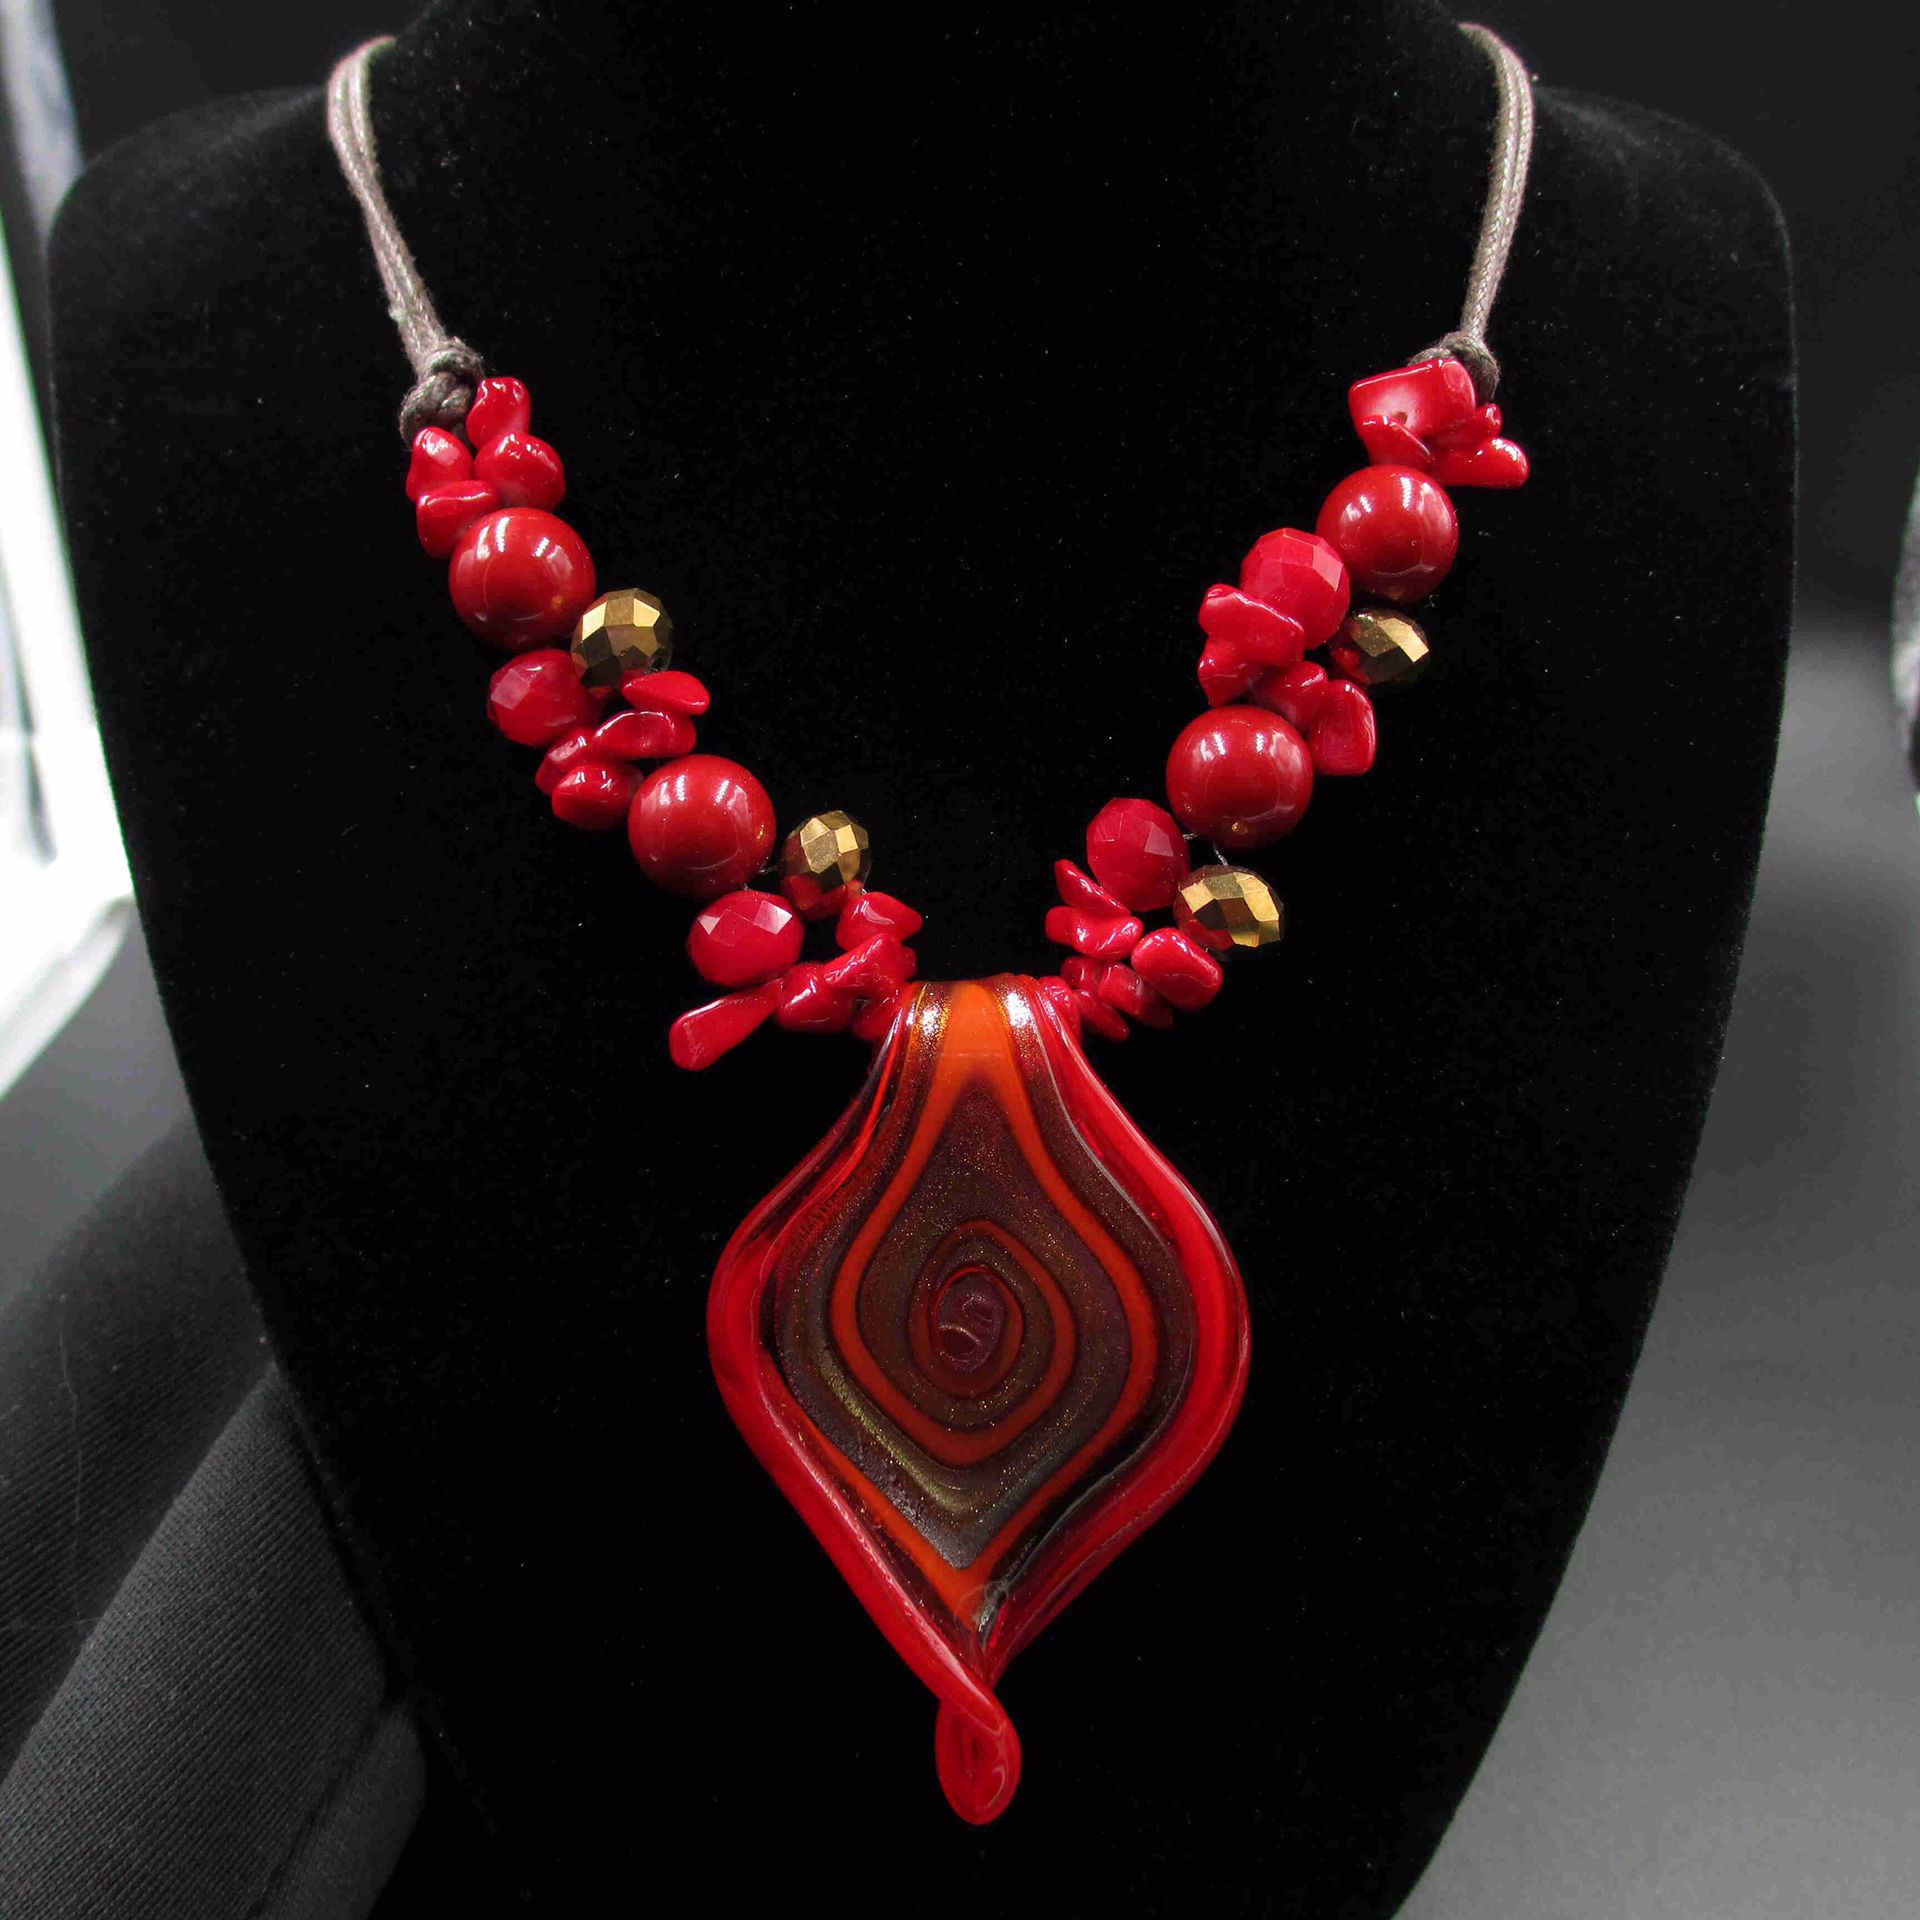 Vintage 20 Inch Red Stunning Glass Pendant Necklace Costume Jewelry Fashion Statement Wedding Bohemian Elegant Bridal Theater Trendy Gift